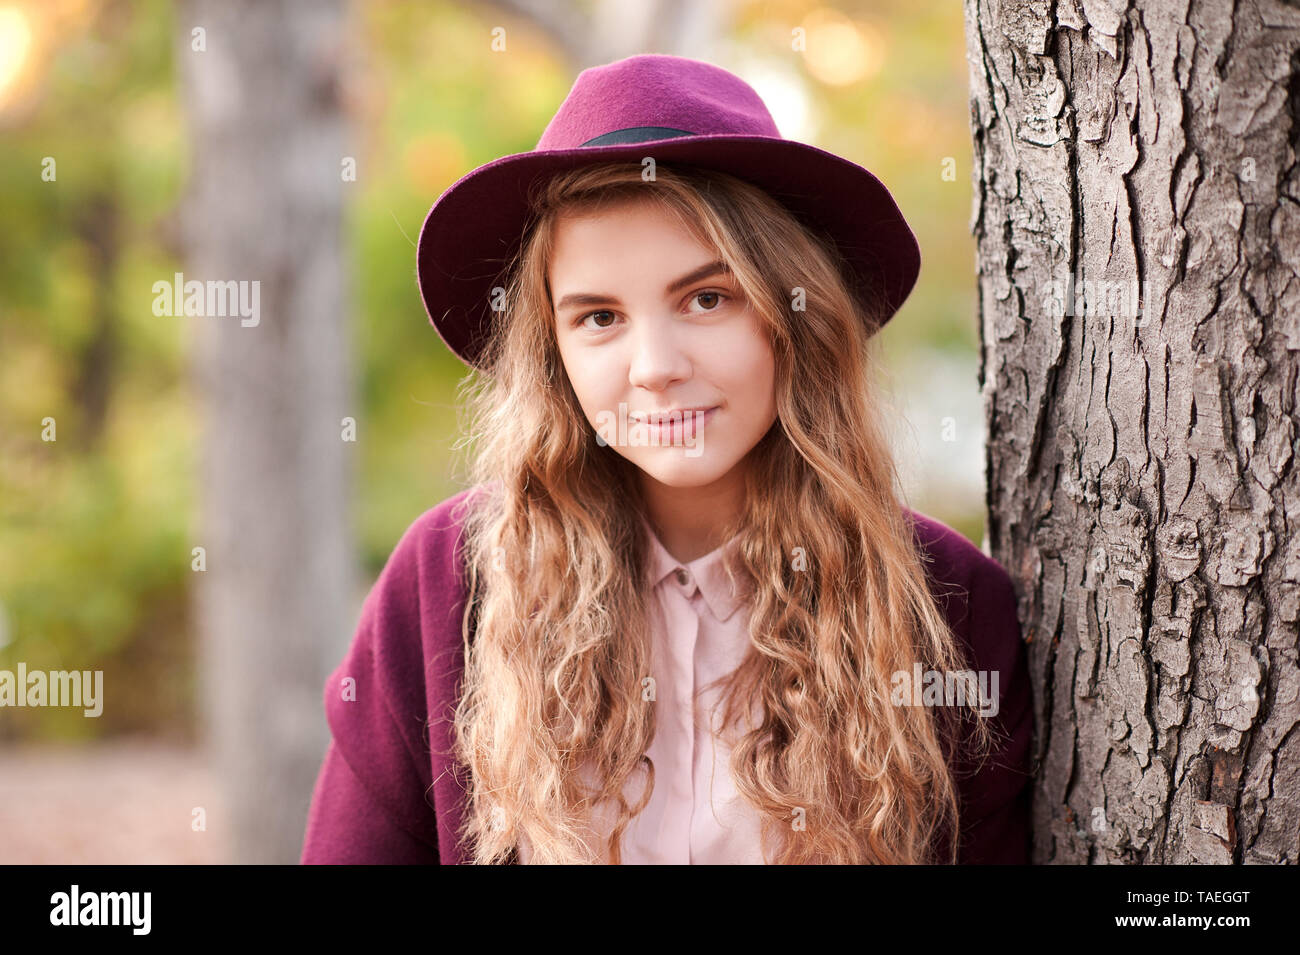 Smiling beautiful girl 14-16 year old wearing winter jacket and hat outdoors. Looking at camera. Childhood. Stock Photo